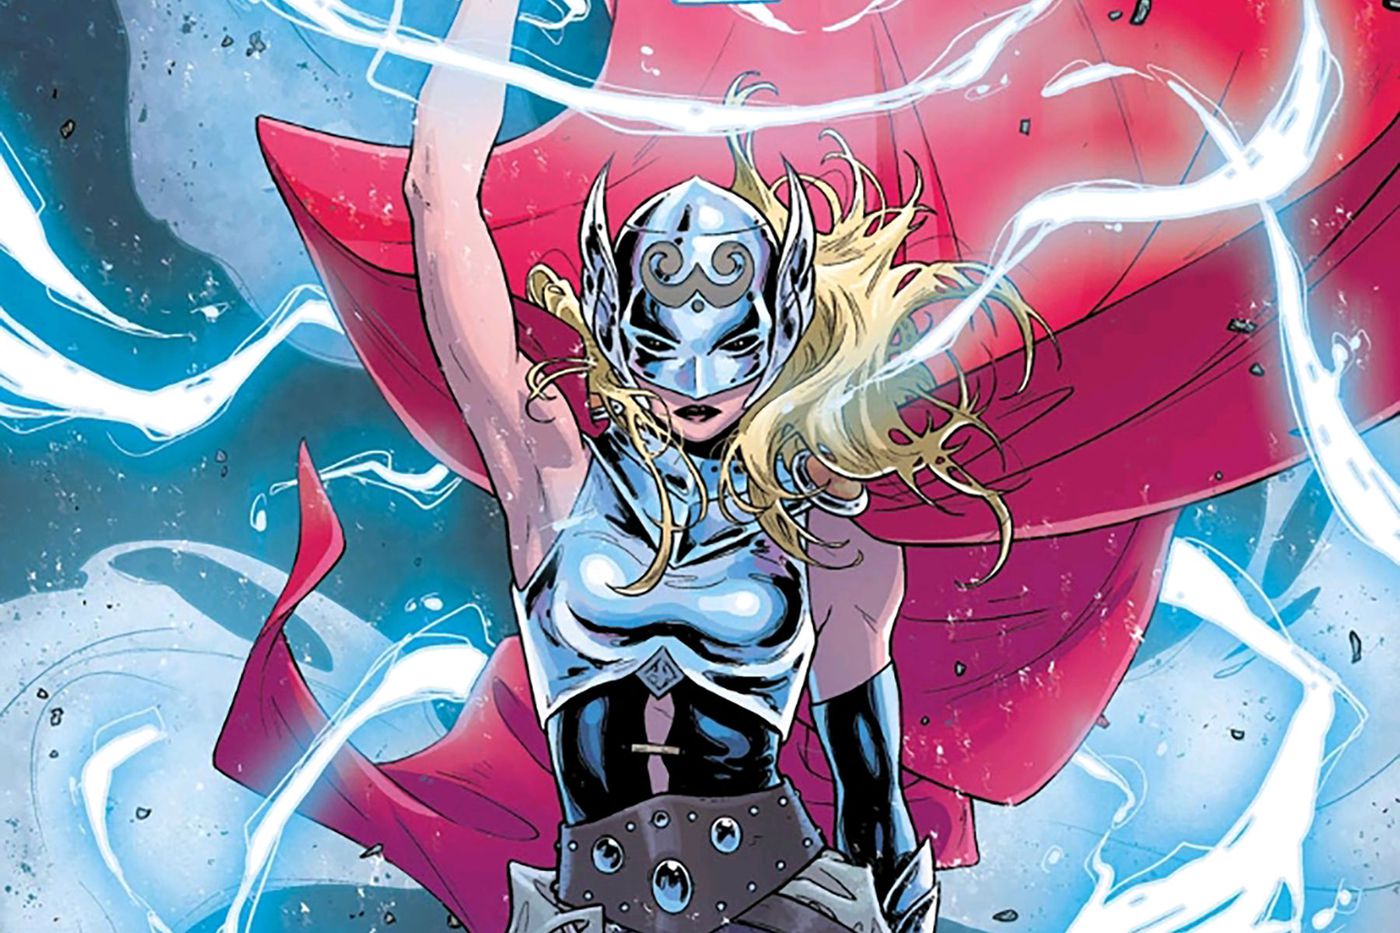 Jane Foster gets all of Thor's powers as the Mighty Thor. Pic courtesy: polygon.com